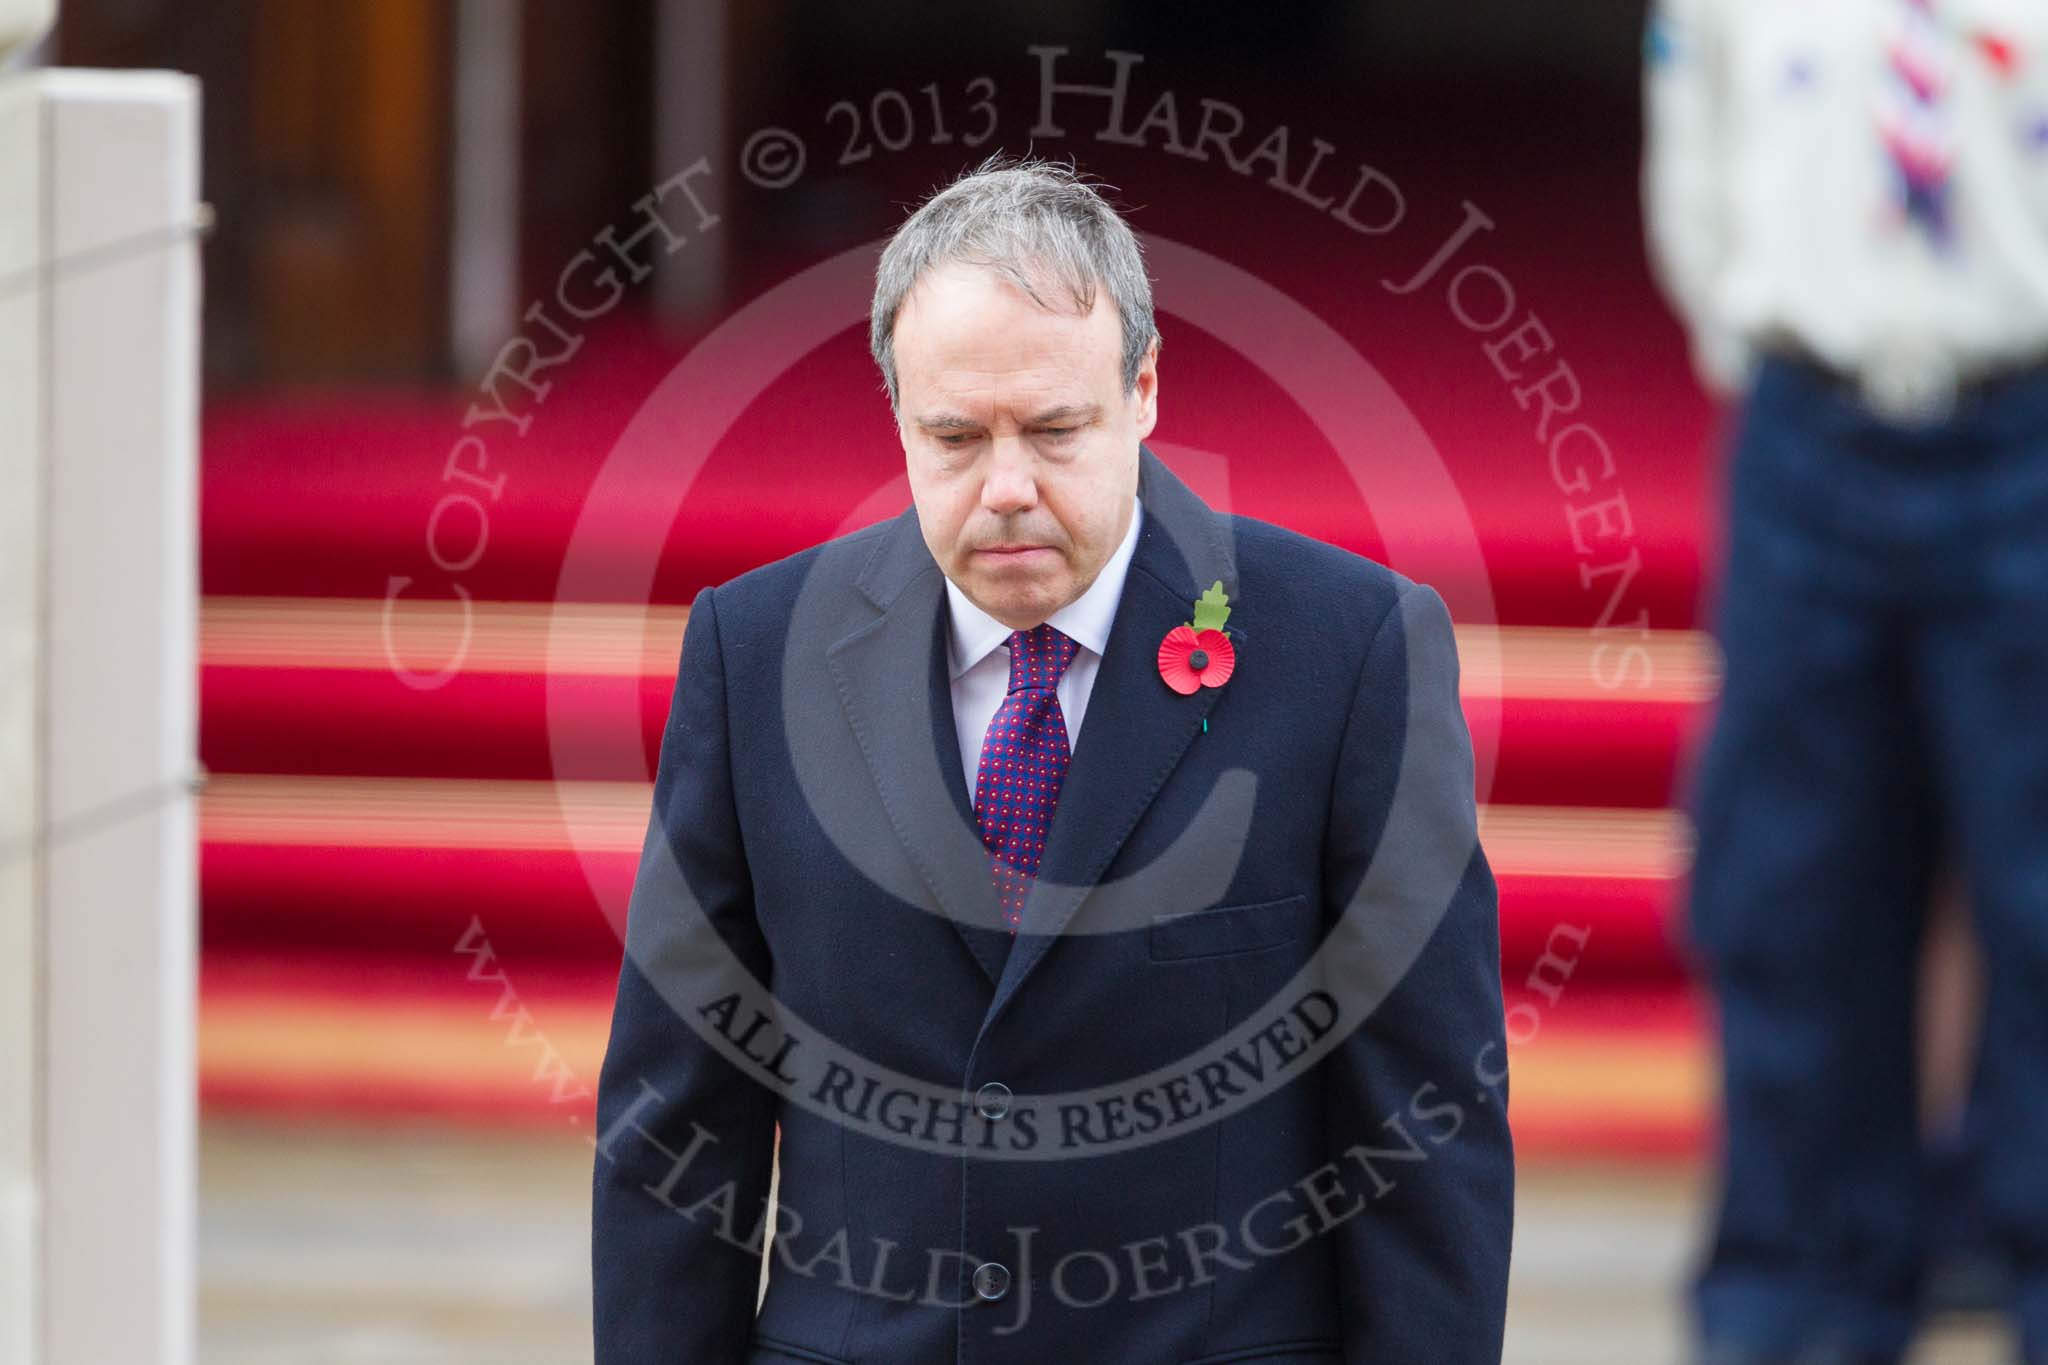 Remembrance Sunday at the Cenotaph 2015: The Westminster Democratic Unionist Party Leader, Nigel Dodds, after laying his wreath at the Cenotaph. Image #221, 08 November 2015 11:08 Whitehall, London, UK